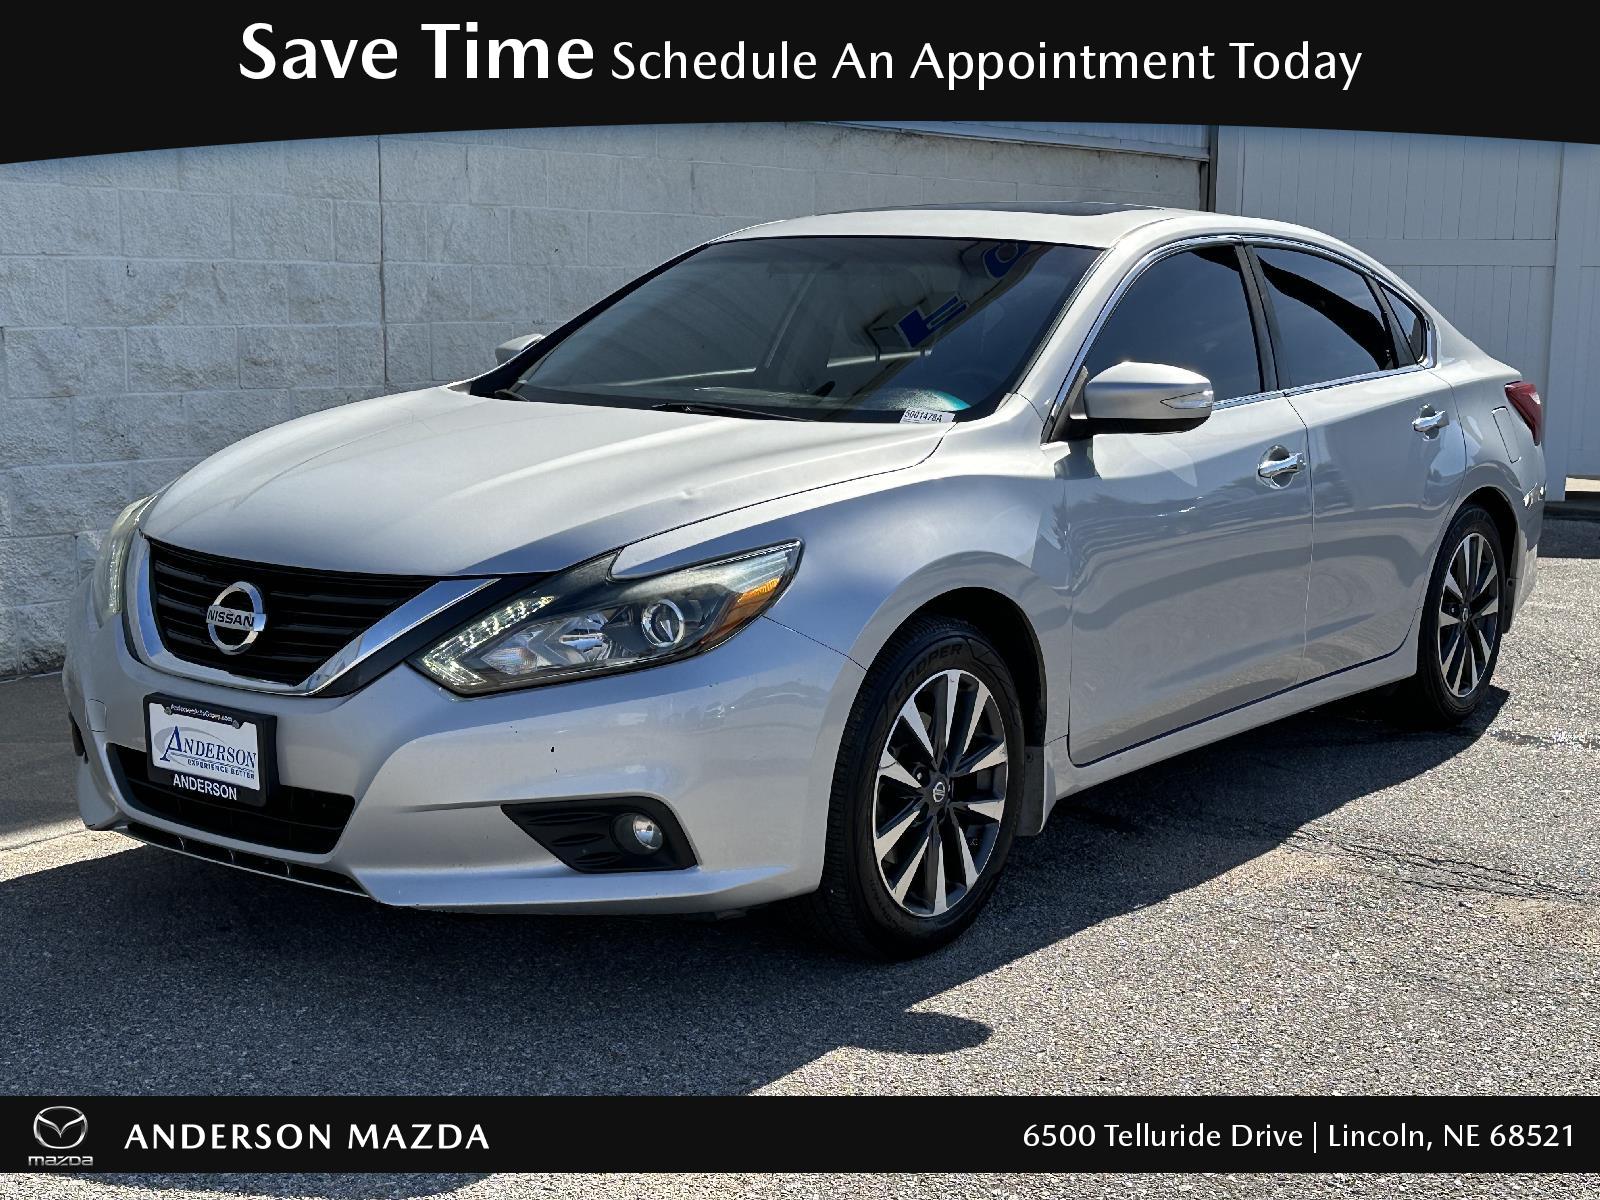 Used 2016 Nissan Altima 2.5 SL Stock: 5001478A